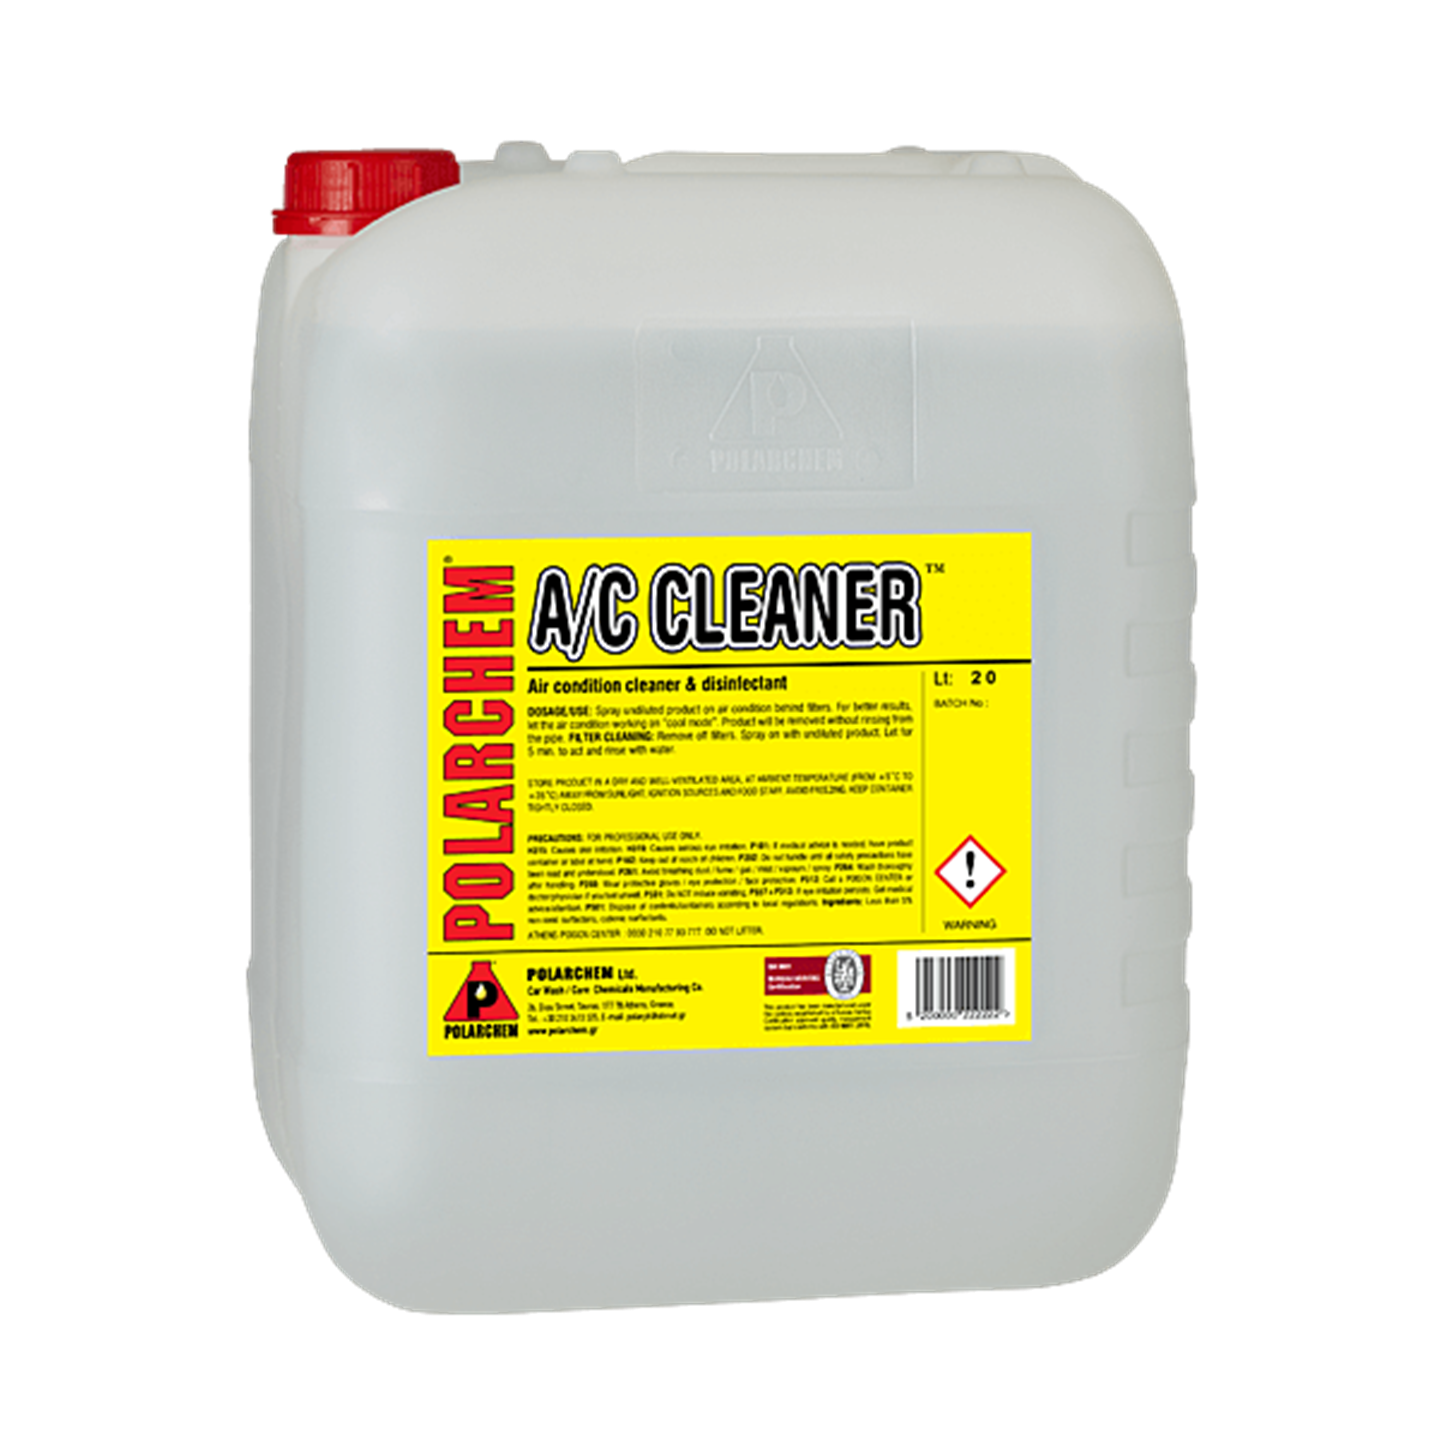 A/C CLEANER 